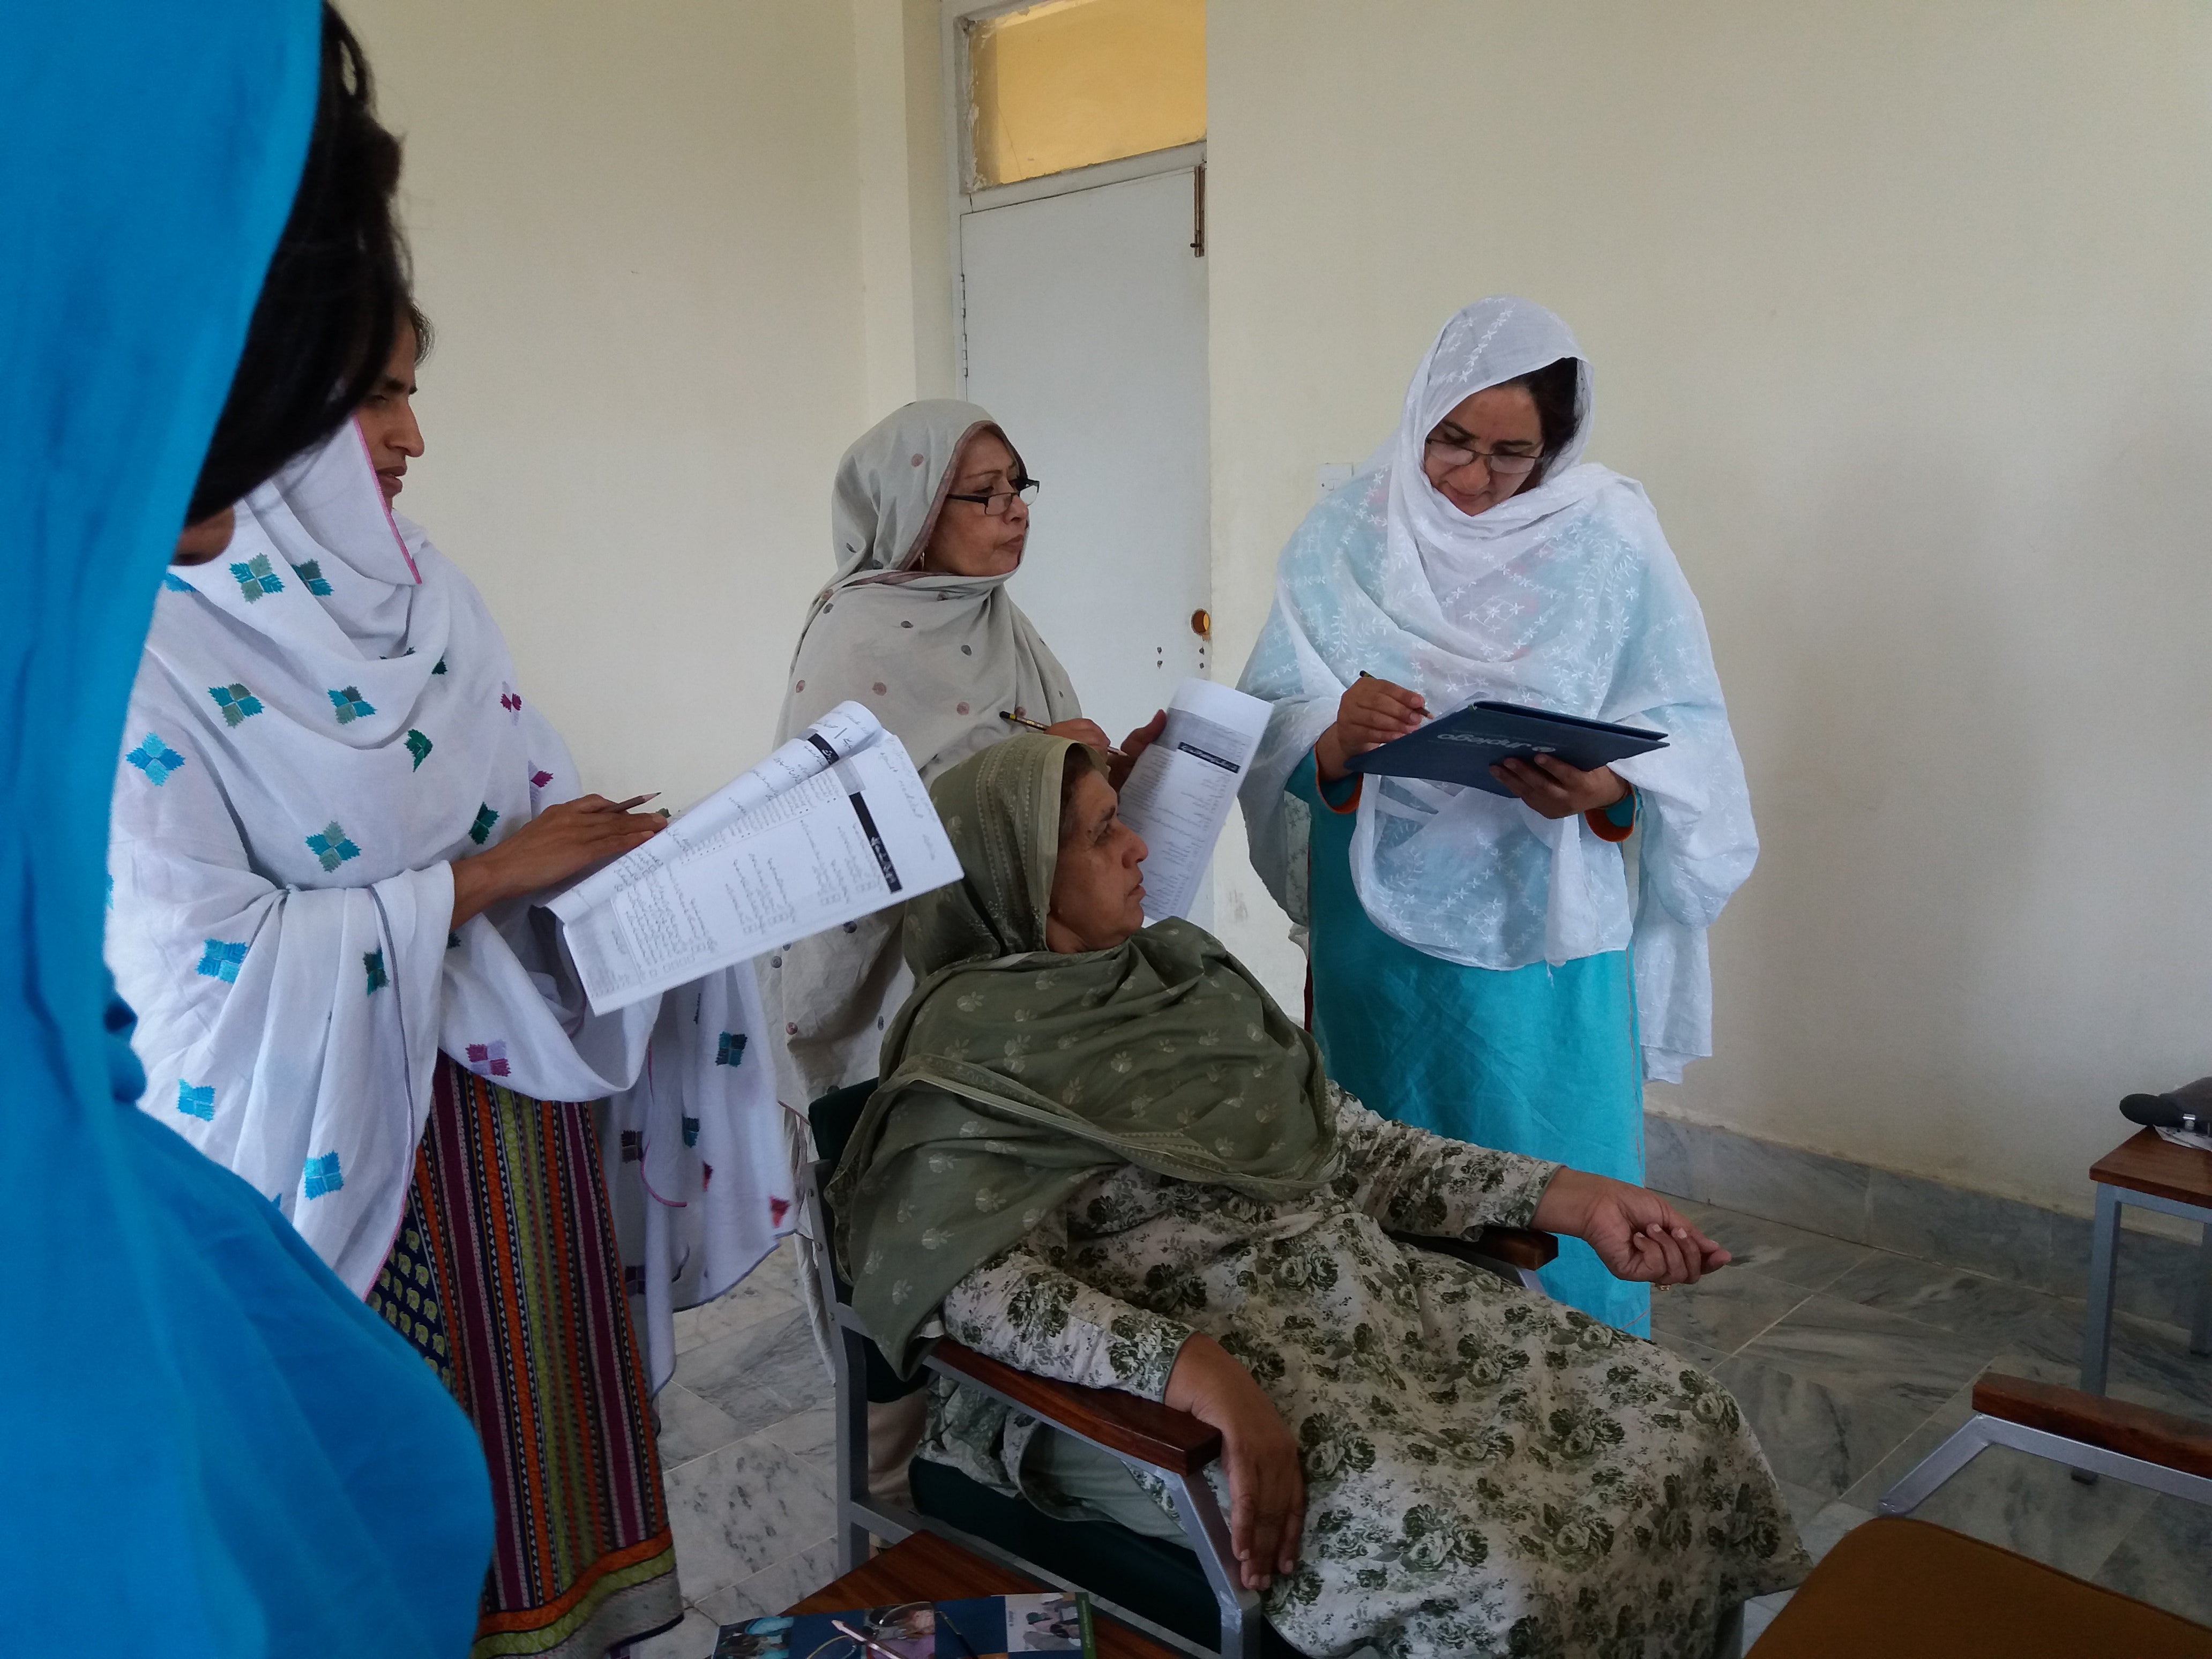 Lady Health Visitors and Community Midwives engaged in interactive role plays to facilitate learning during the Safe Childbirth Checklist training in the province of Khyber Pakhtunkhwa, Pakistan